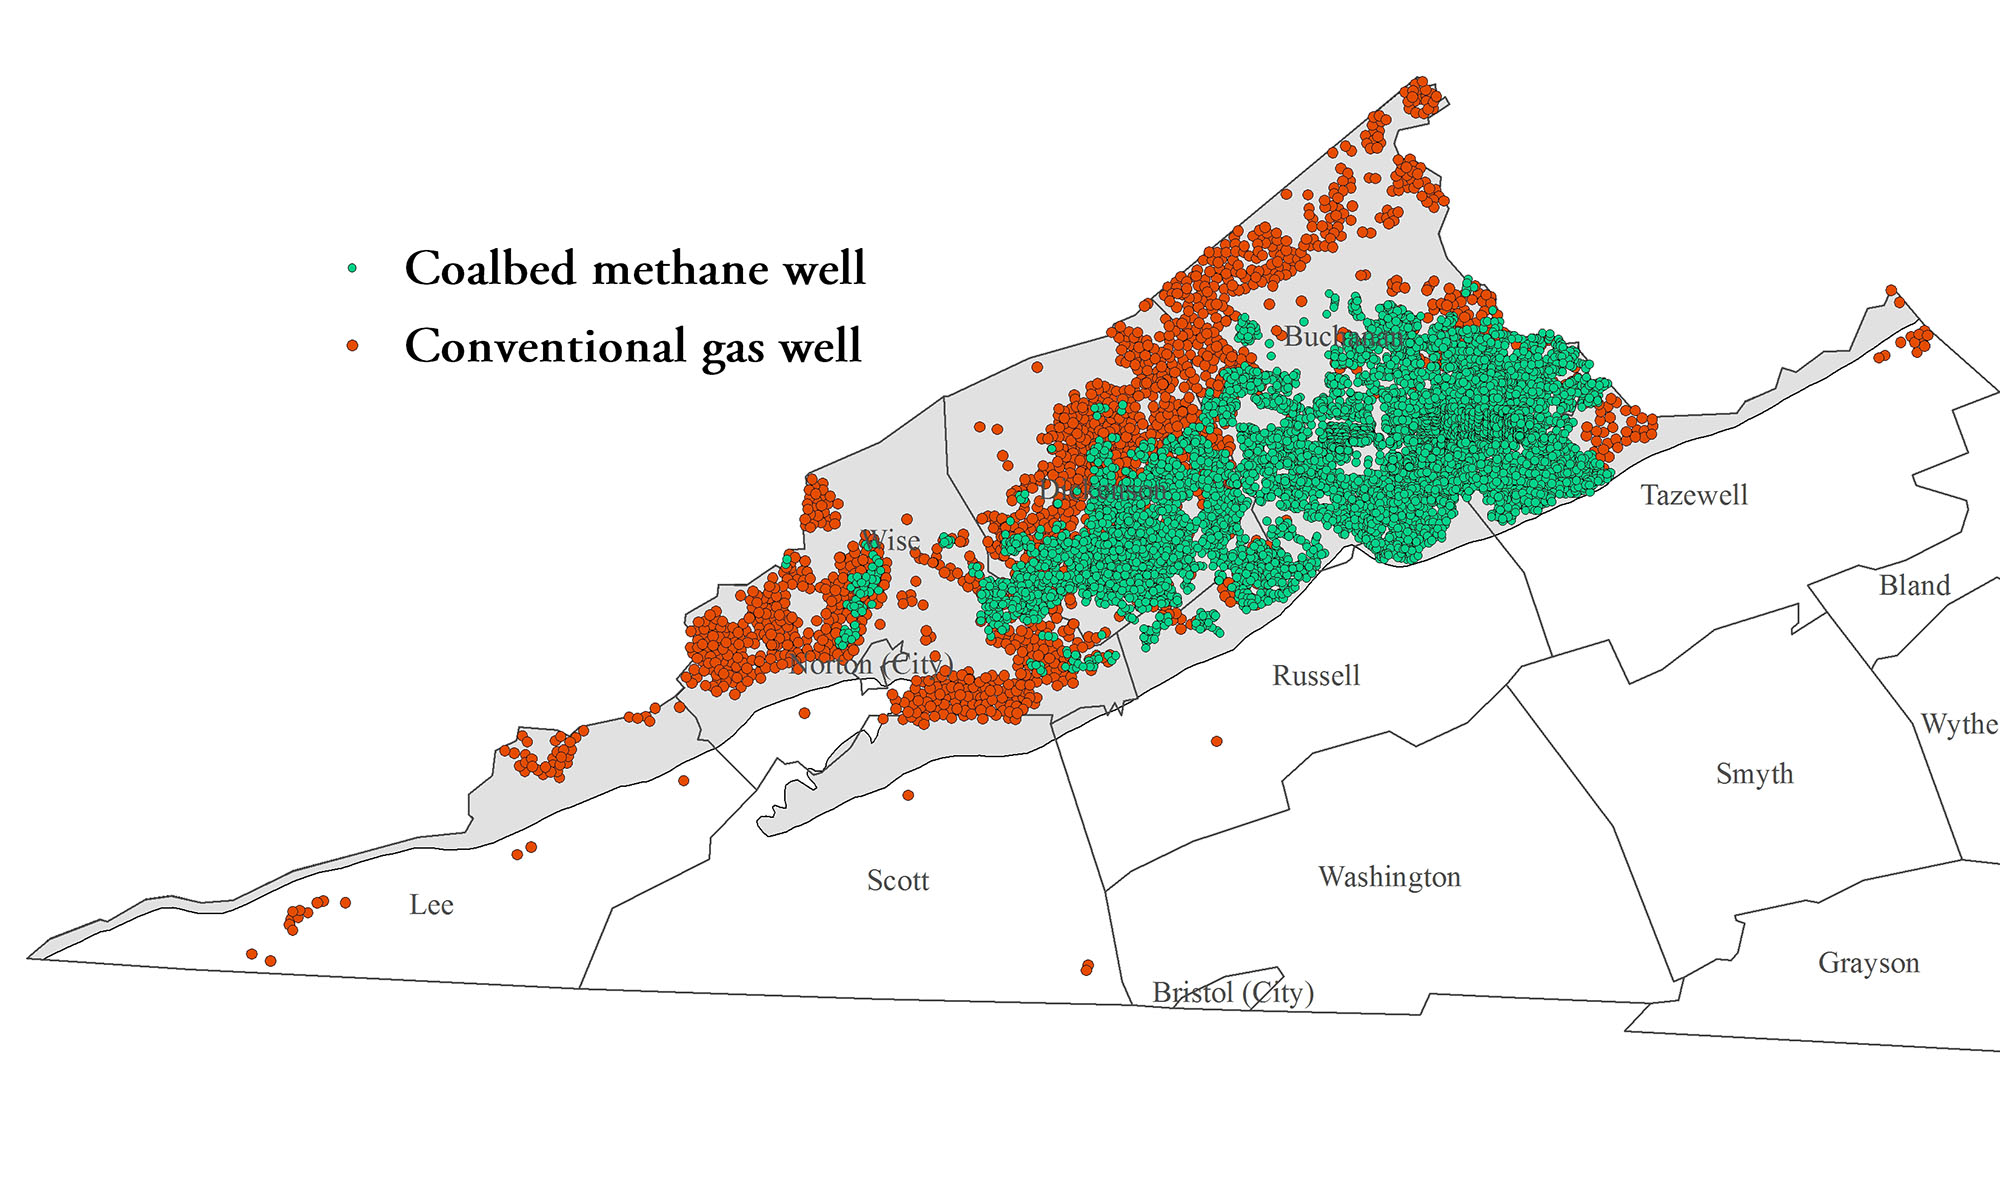 Natural gas production locations in Virginia